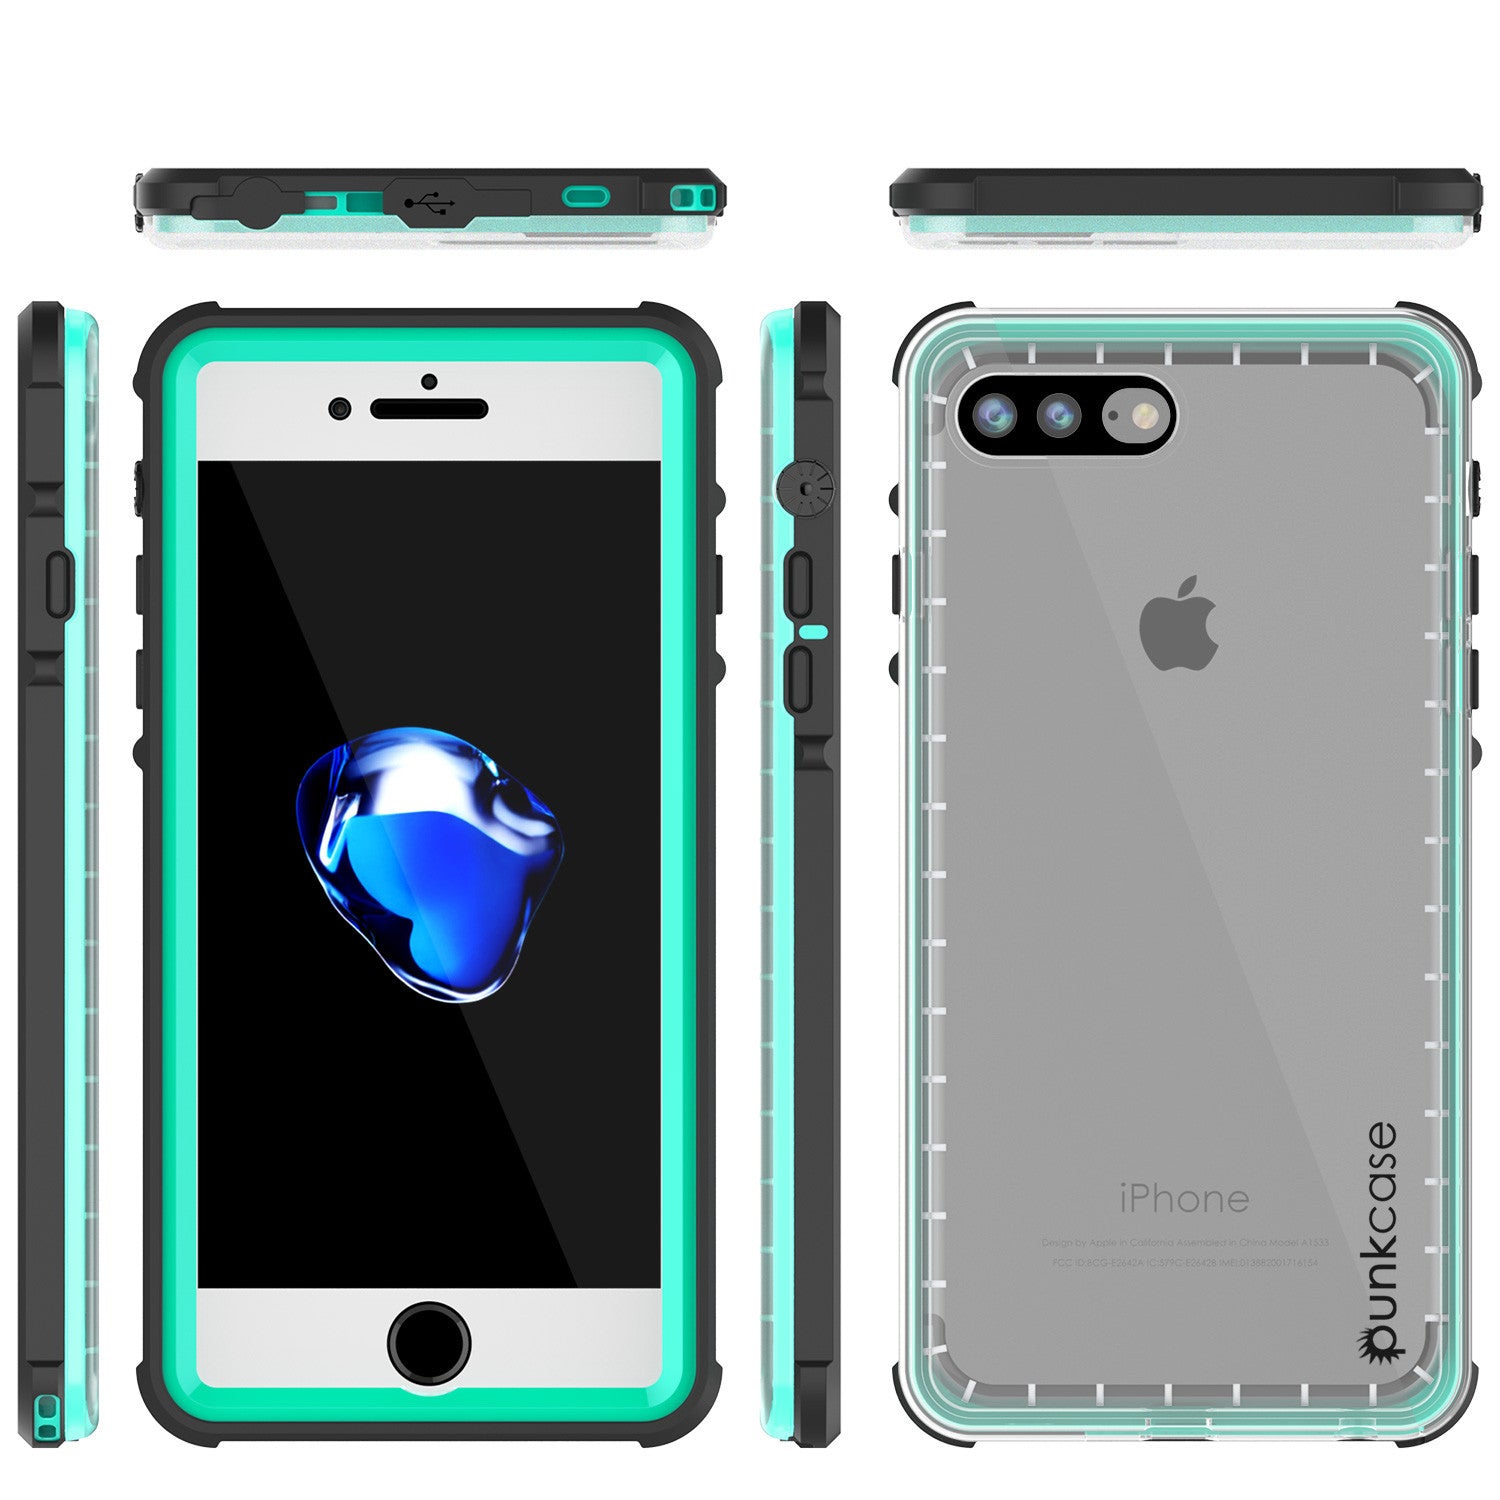 iPhone 7+ Plus Waterproof Case, PUNKcase CRYSTAL Teal W/ Attached Screen Protector | Warranty